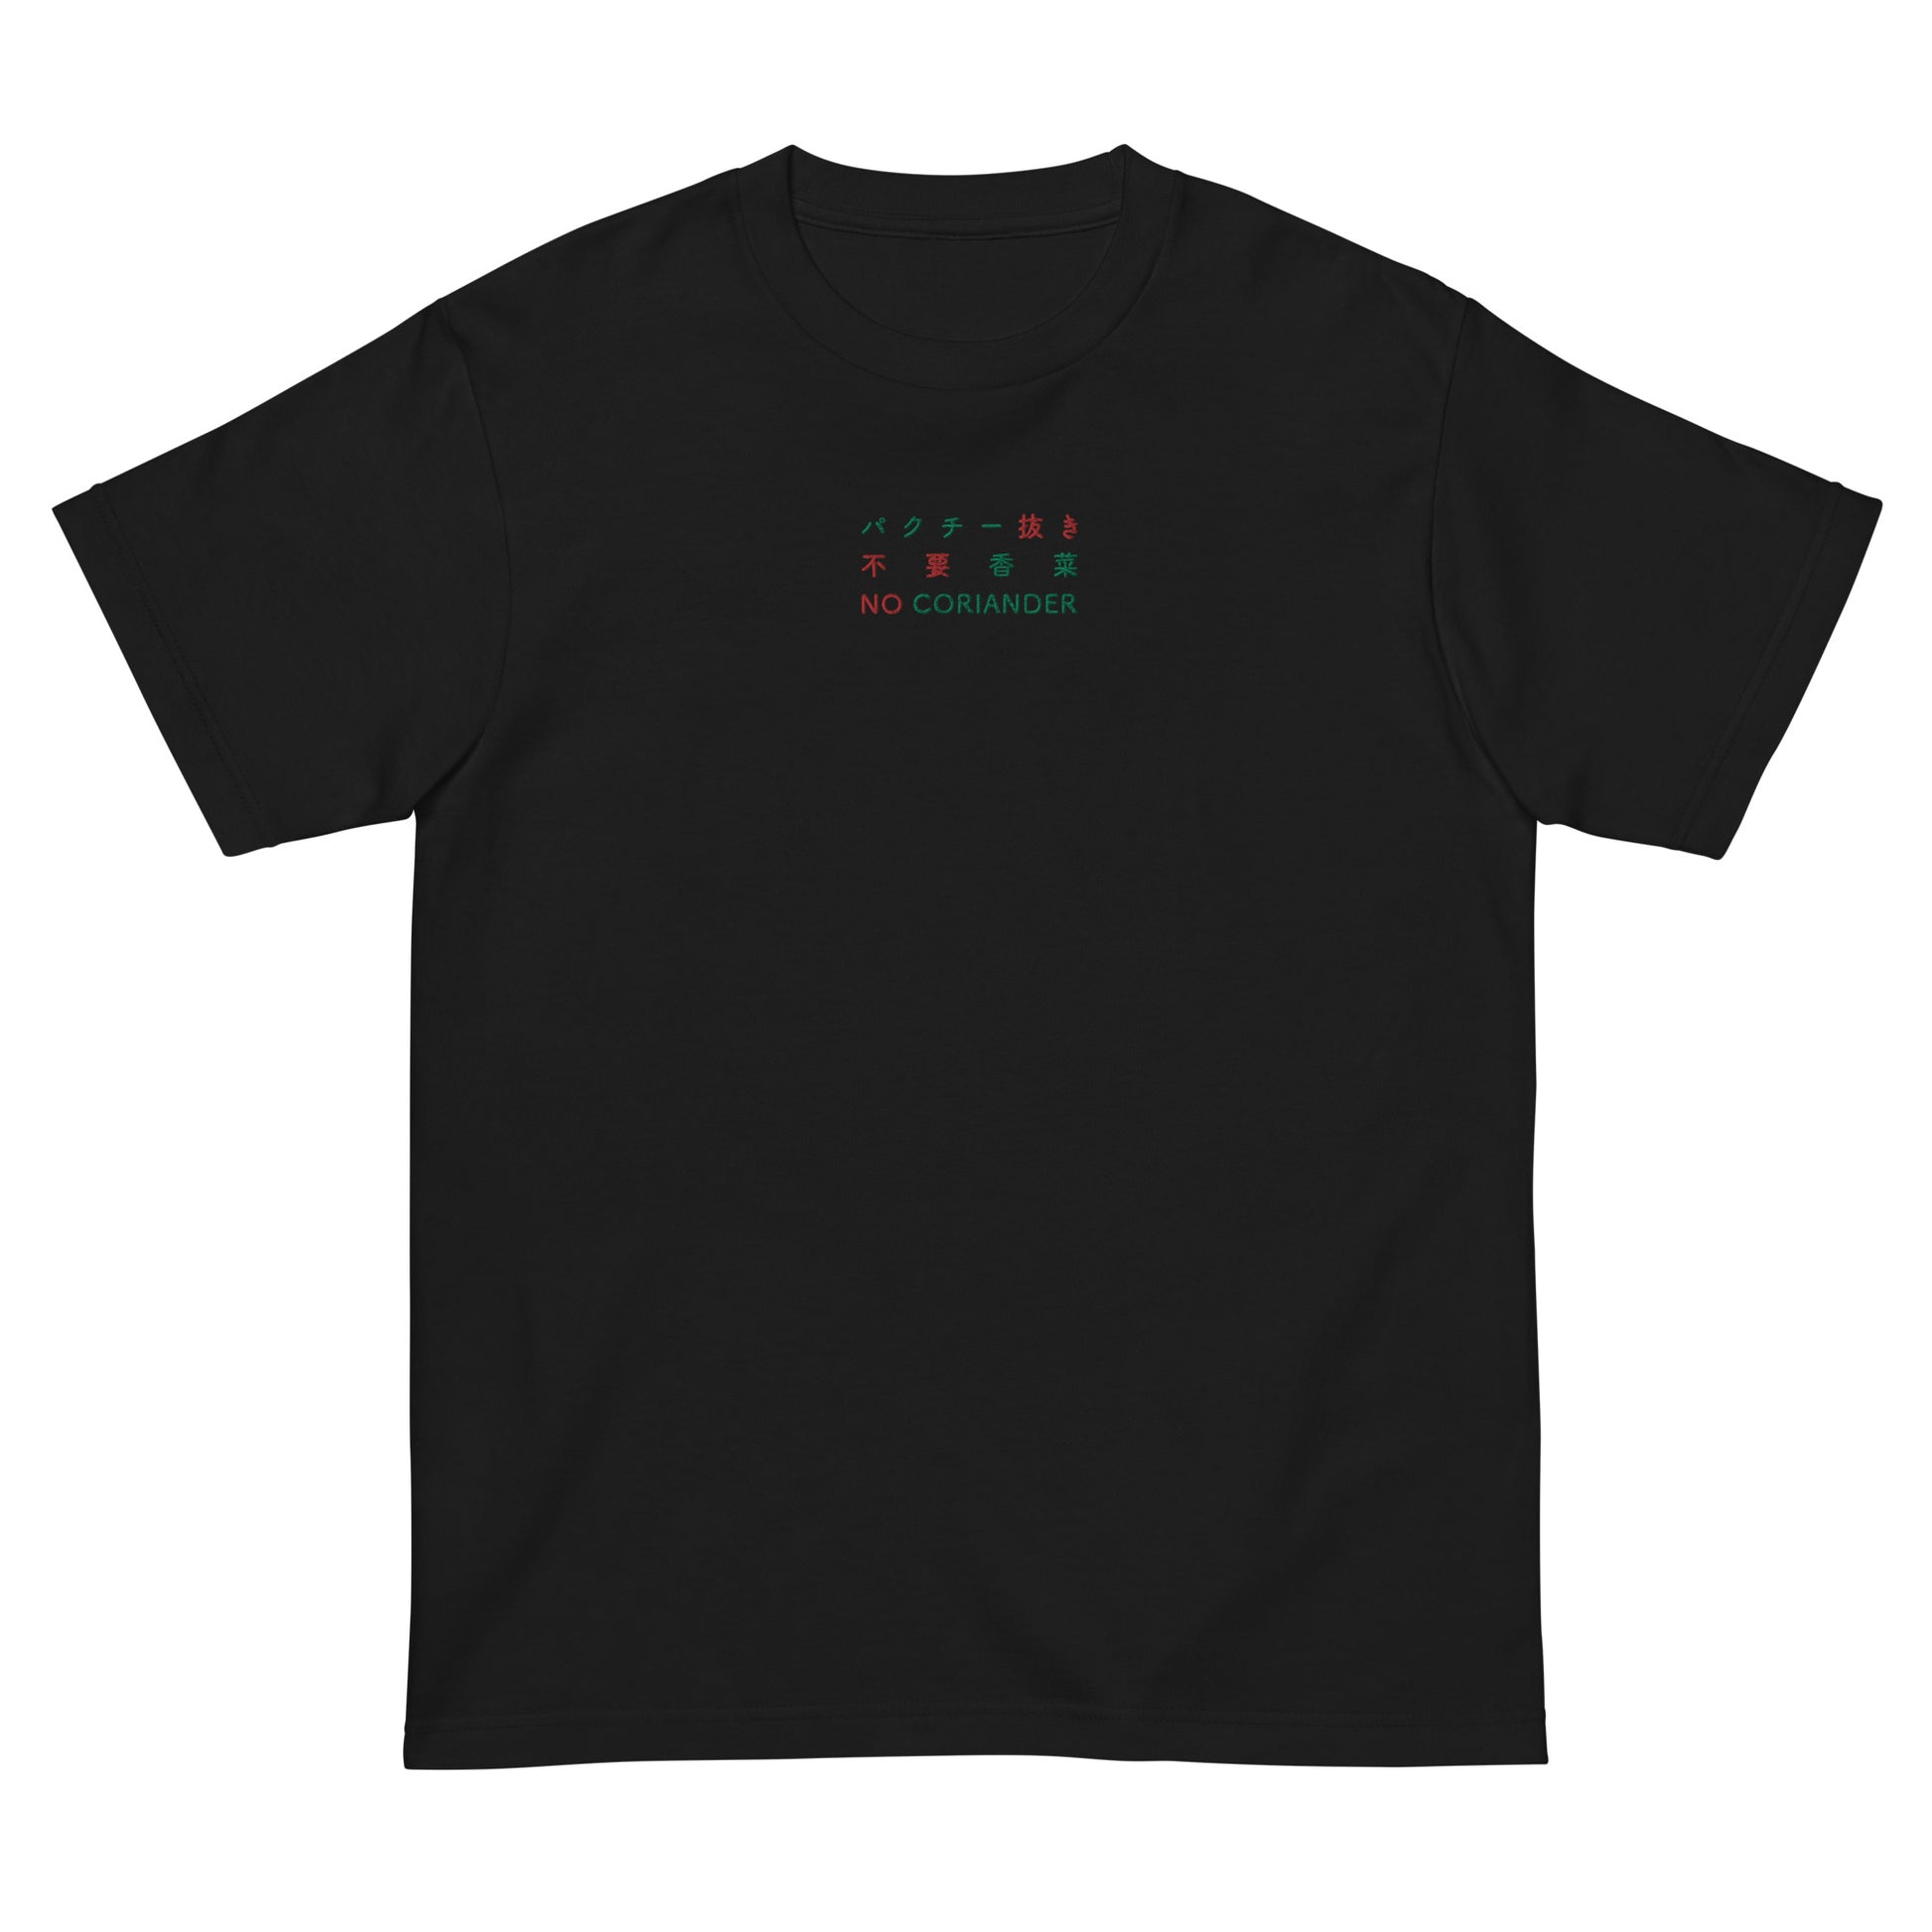 Black High Quality Tee - Front Design with Red/Green Embroidery "NO CORIANDER" in three languages